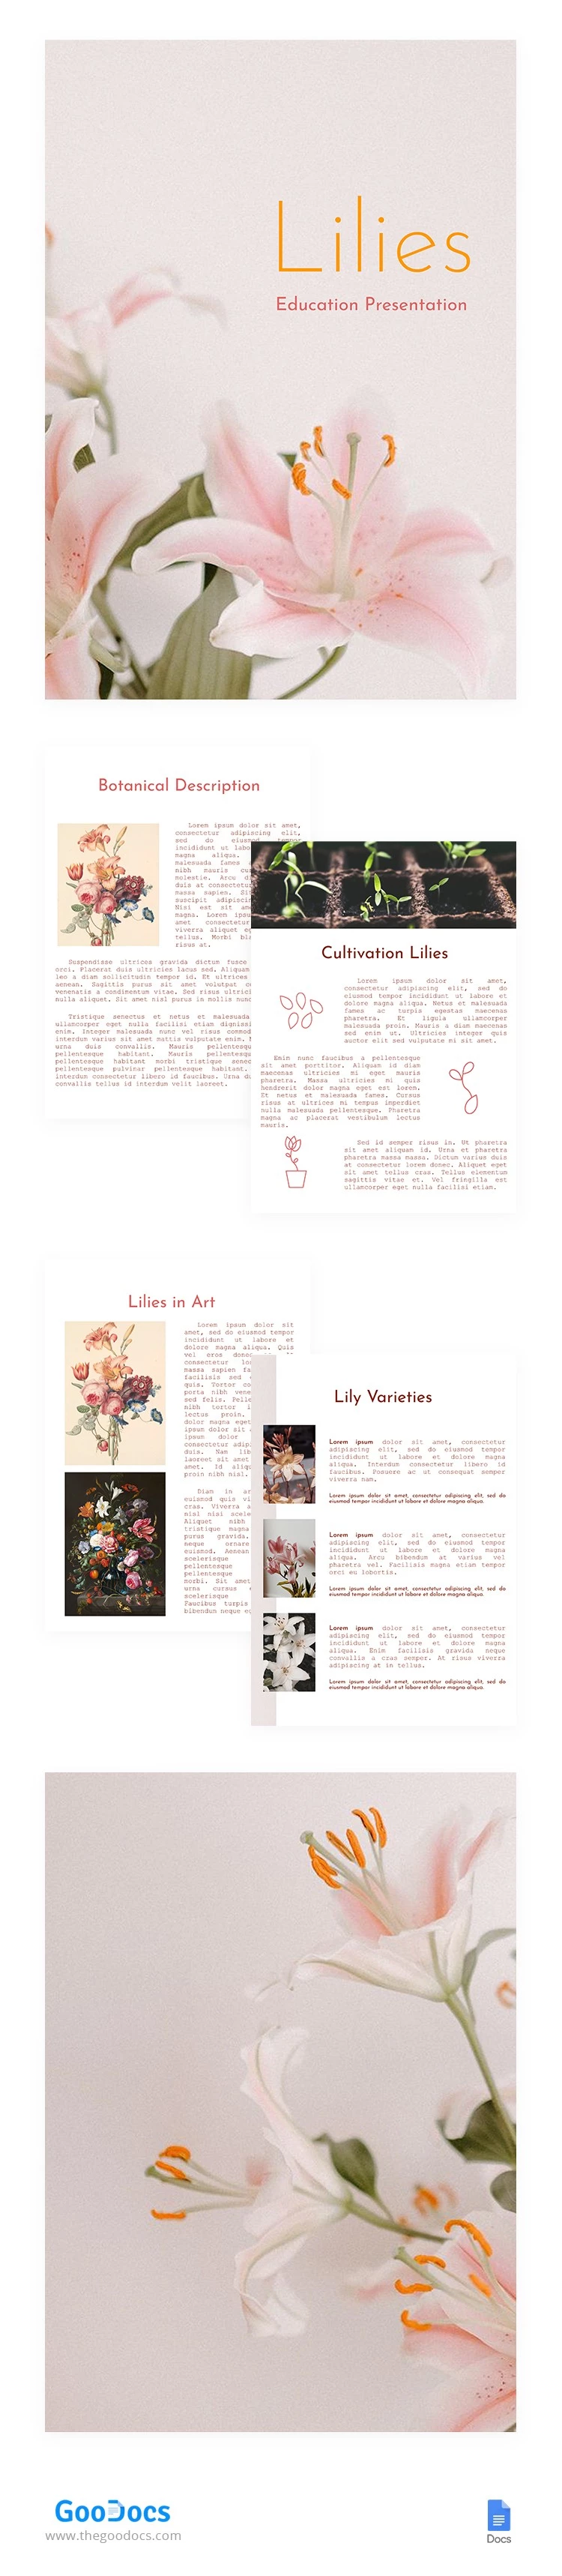 About Lilies Education Presentation - free Google Docs Template - 10062666